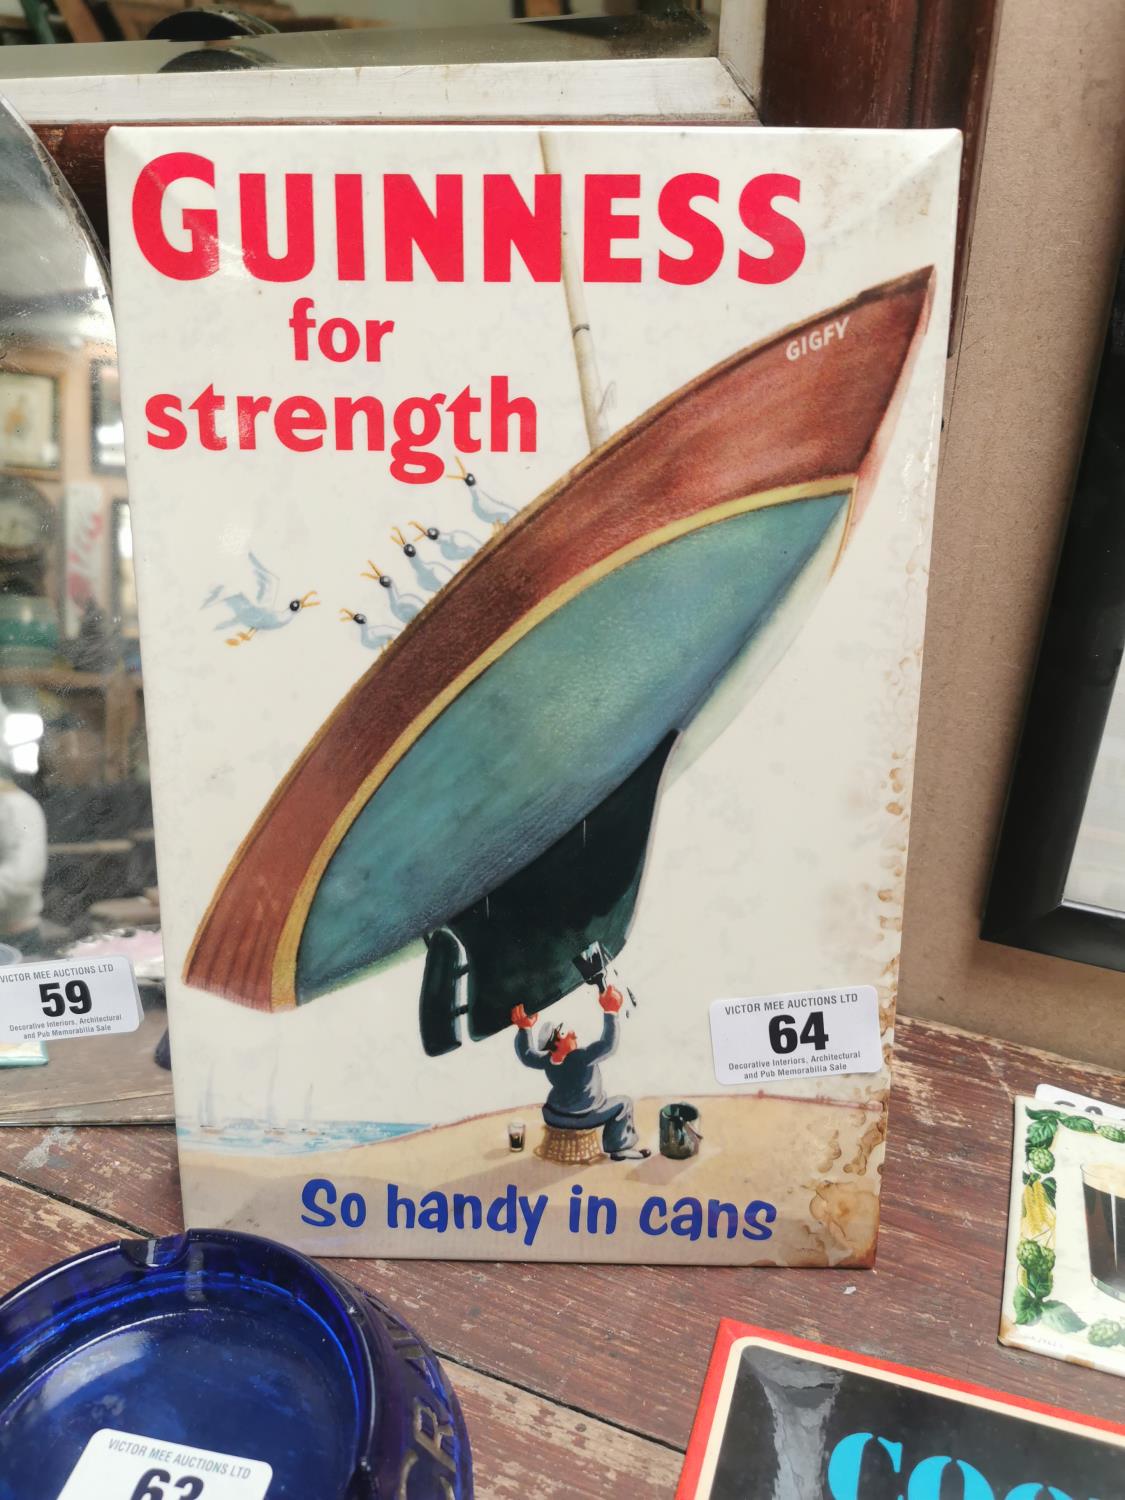 Rare Guinness is For Strength - So handy in cans celluloid advertising show card {30 cm H x 20 cm